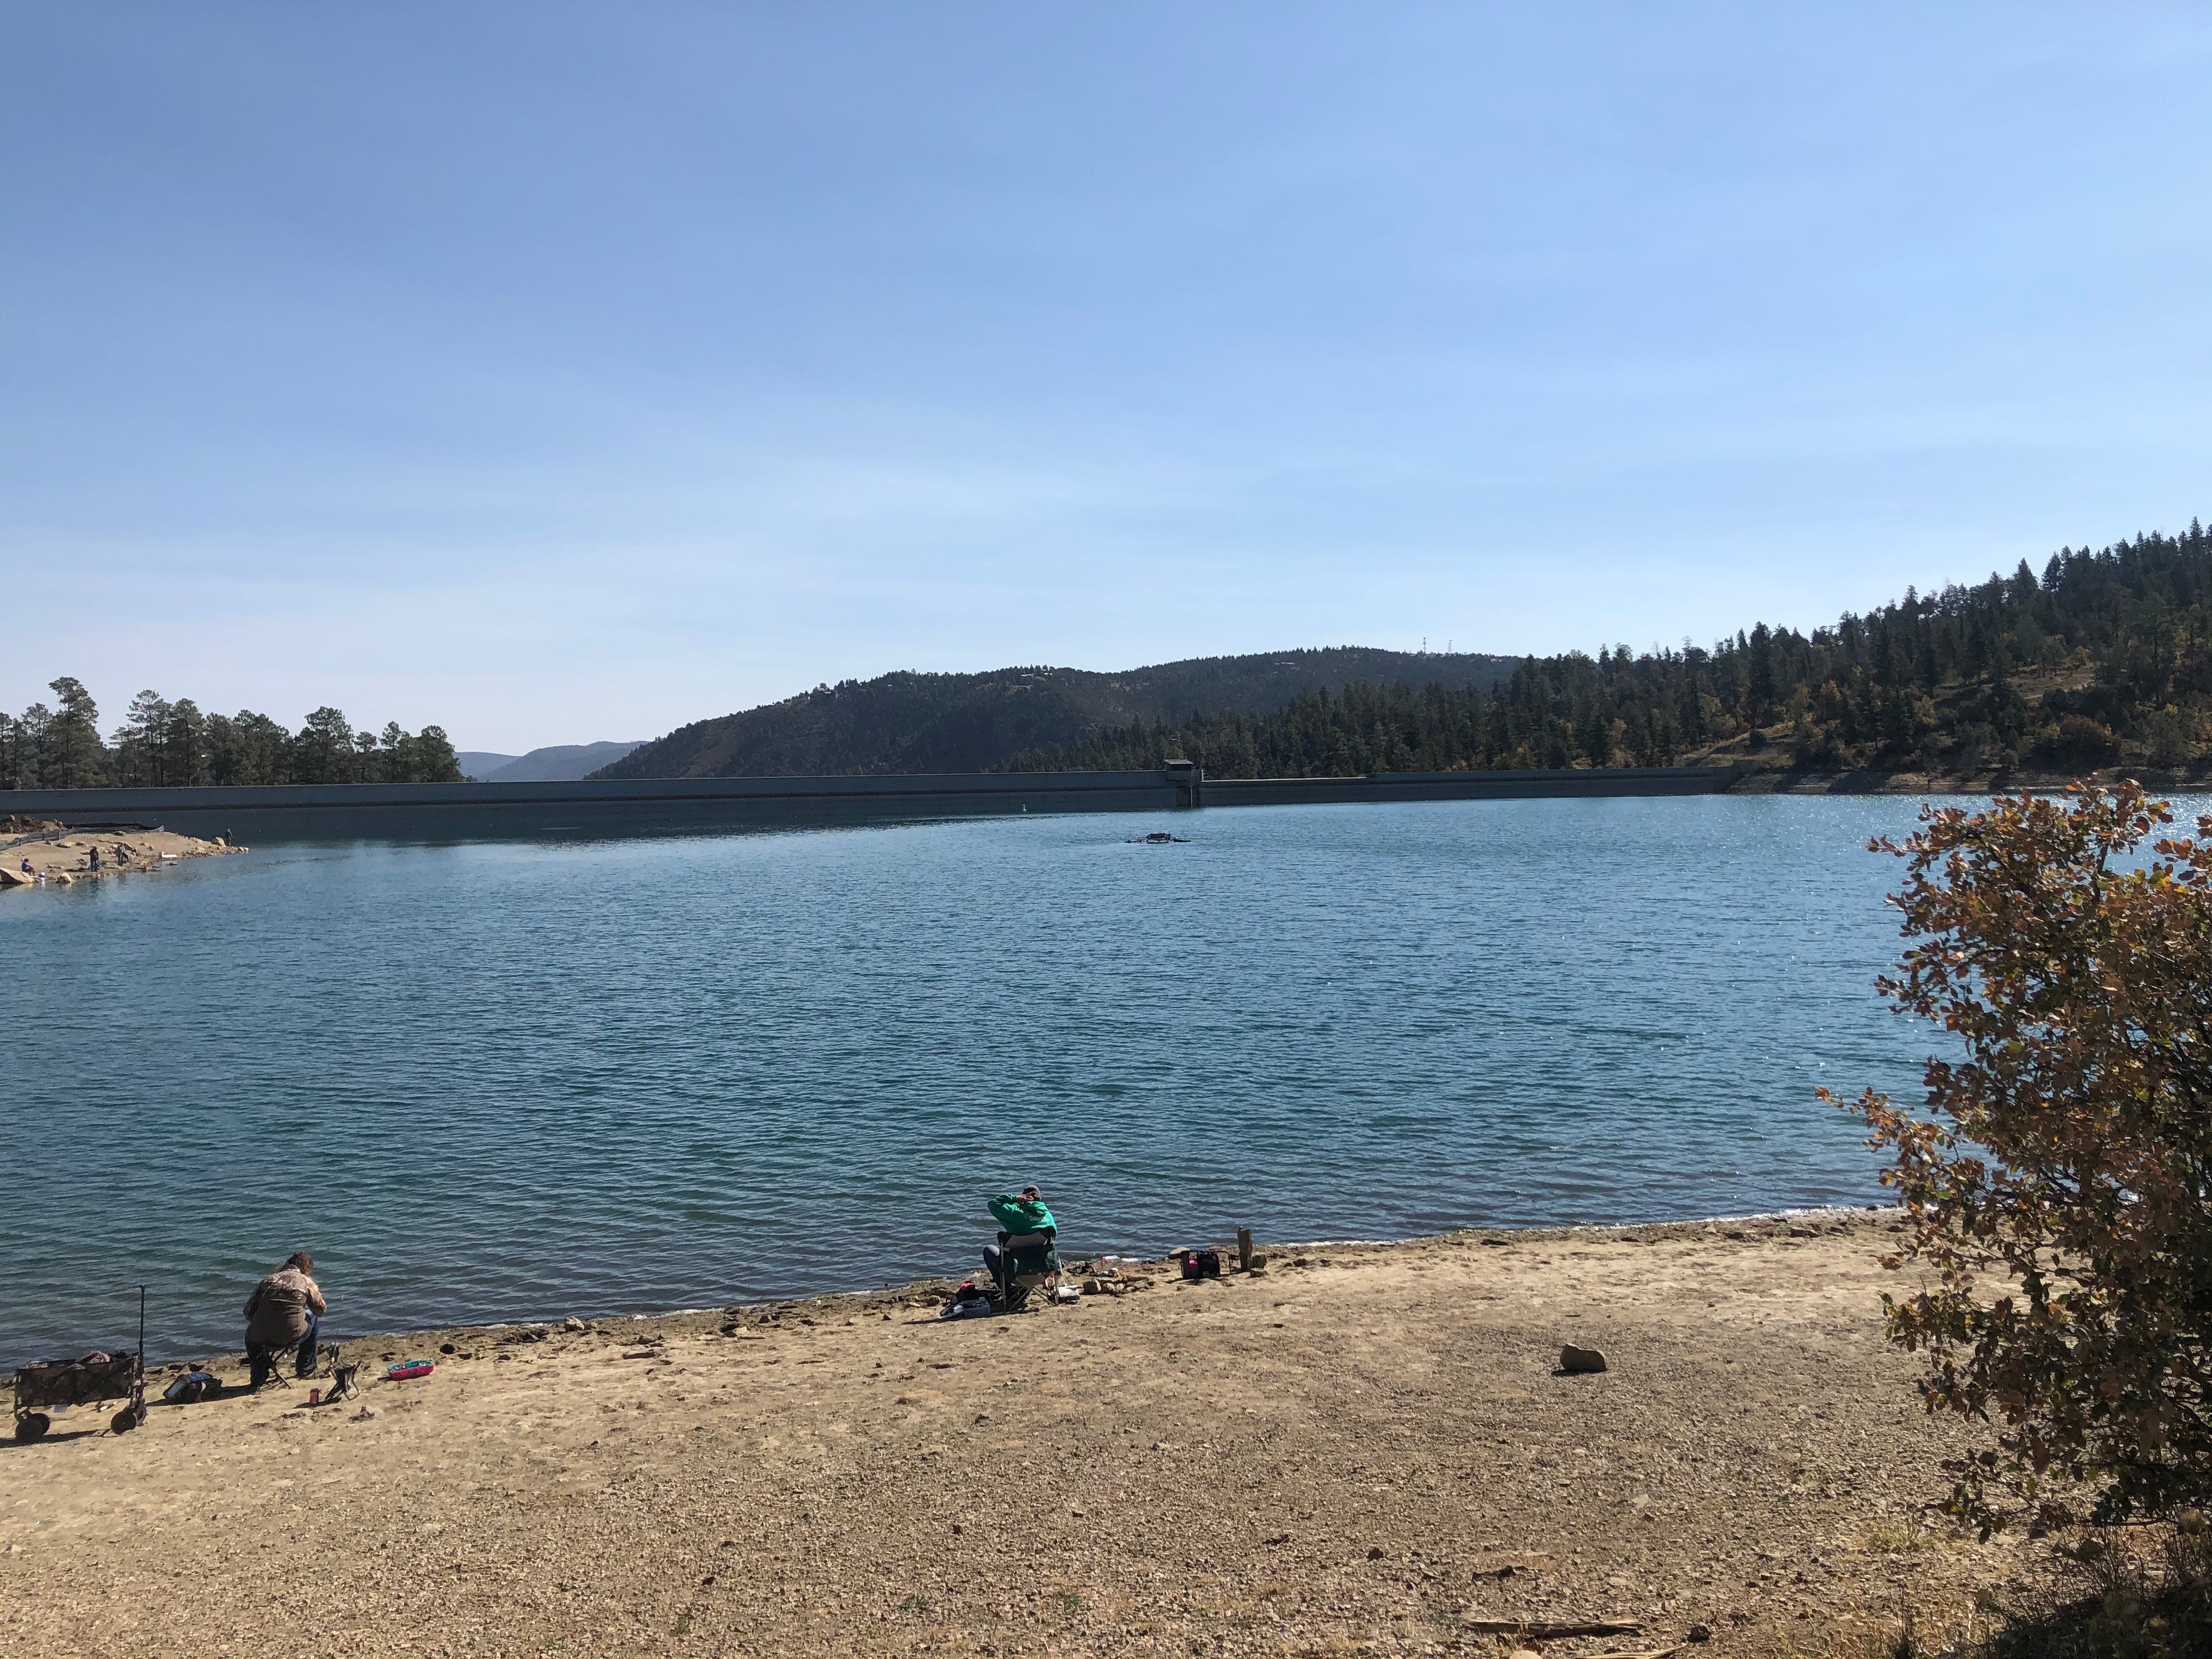 Camper submitted image from Grindstone lake - 3